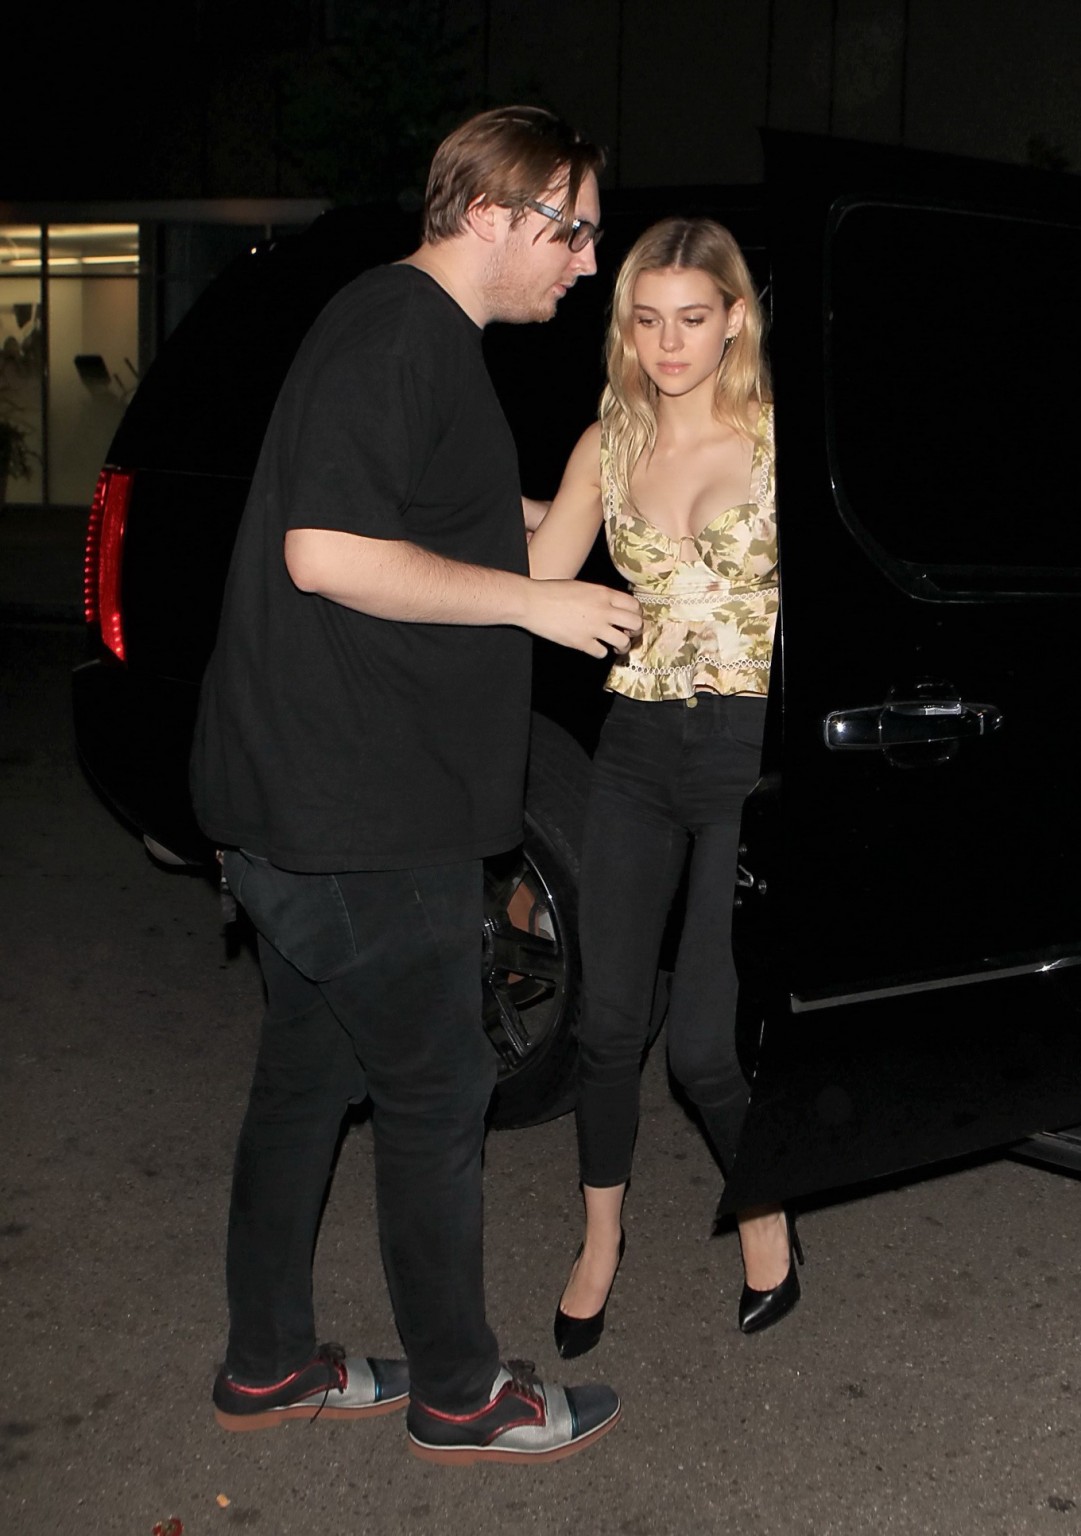 Nicola Peltz shows off her boobs in tiny top and jeans #75150902